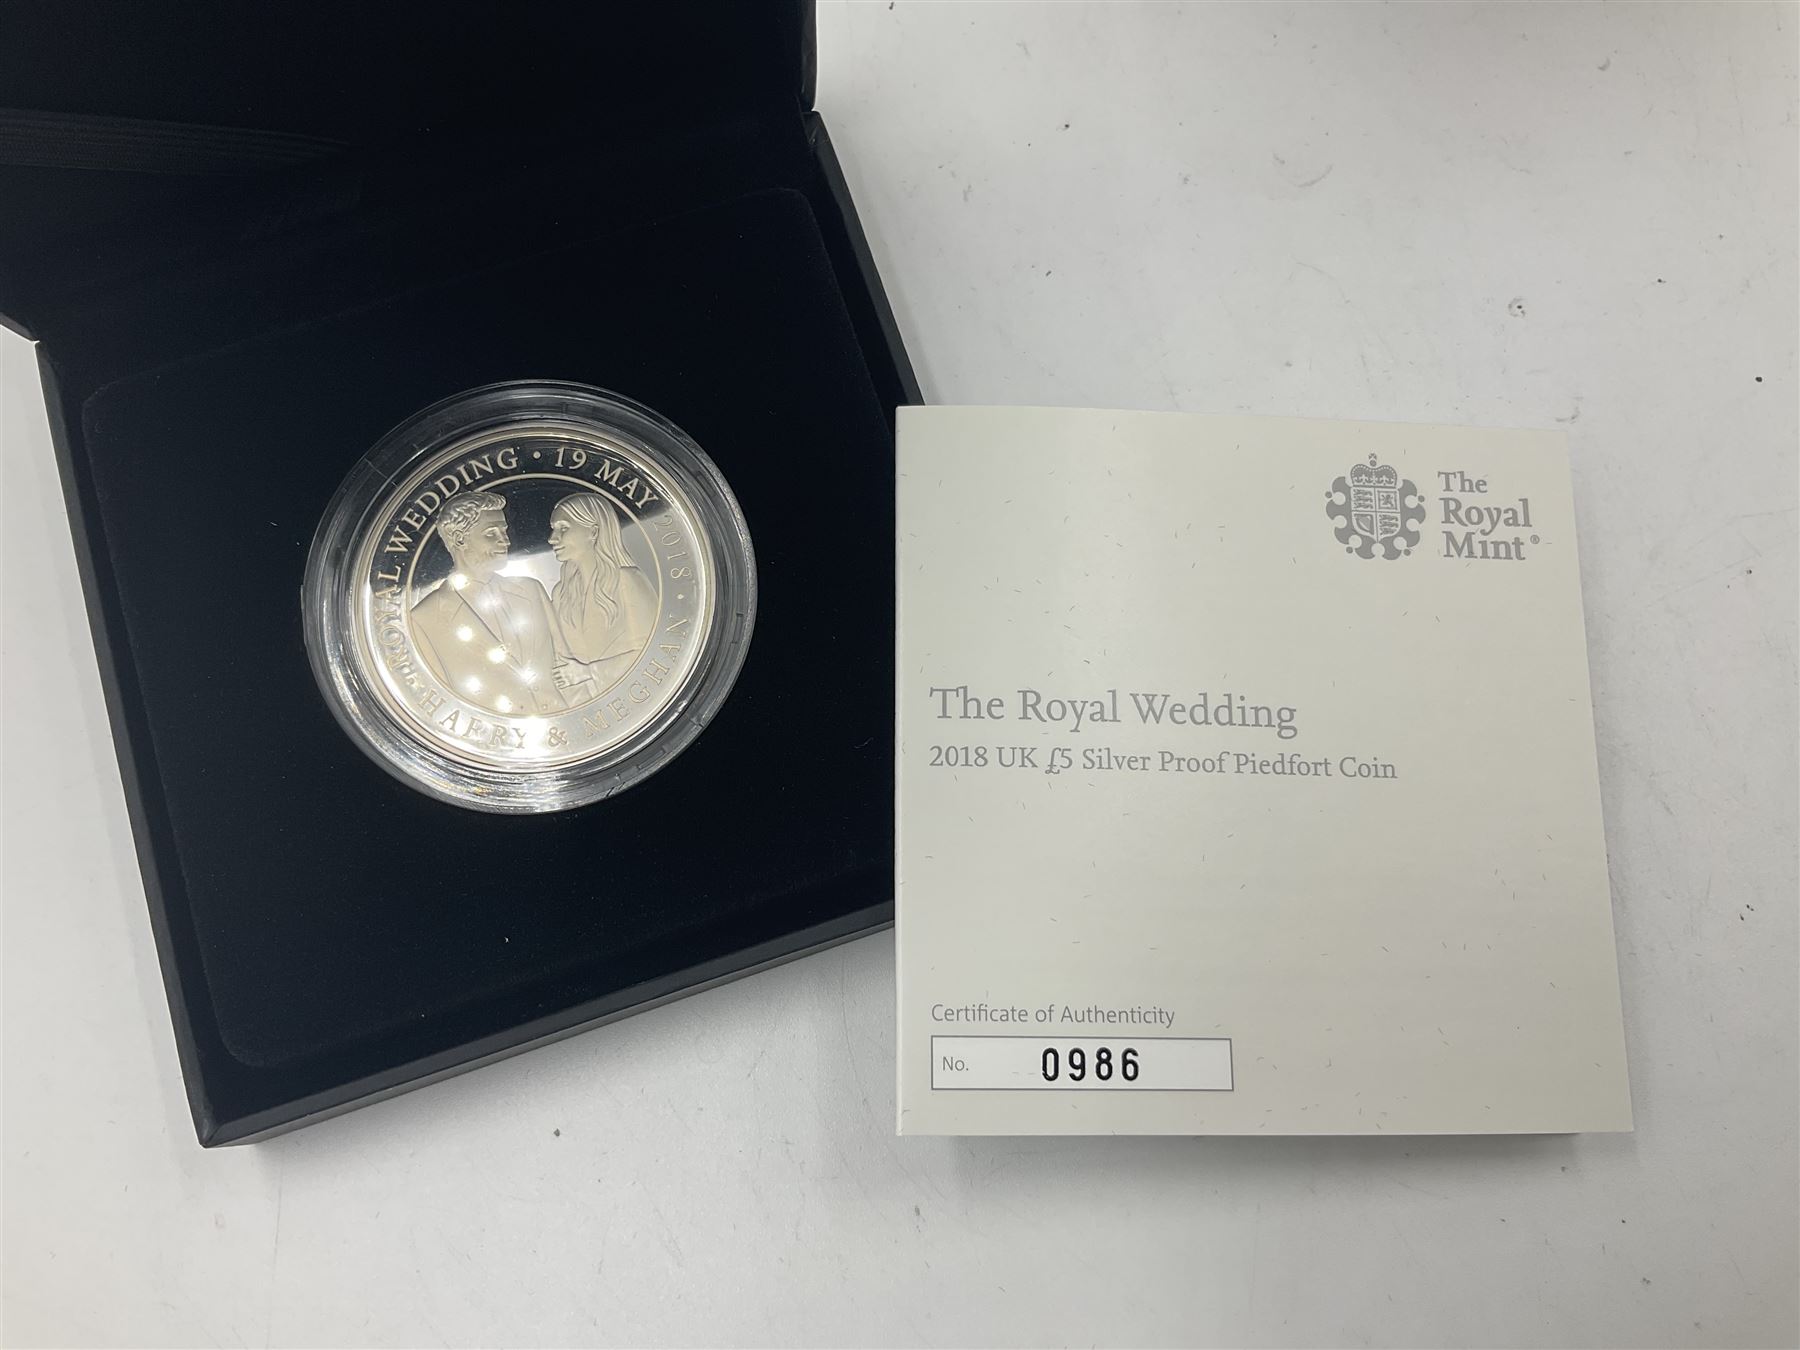 Five The Royal Mint United Kingdom 2018 silver proof piedfort five pound coins - Image 15 of 16